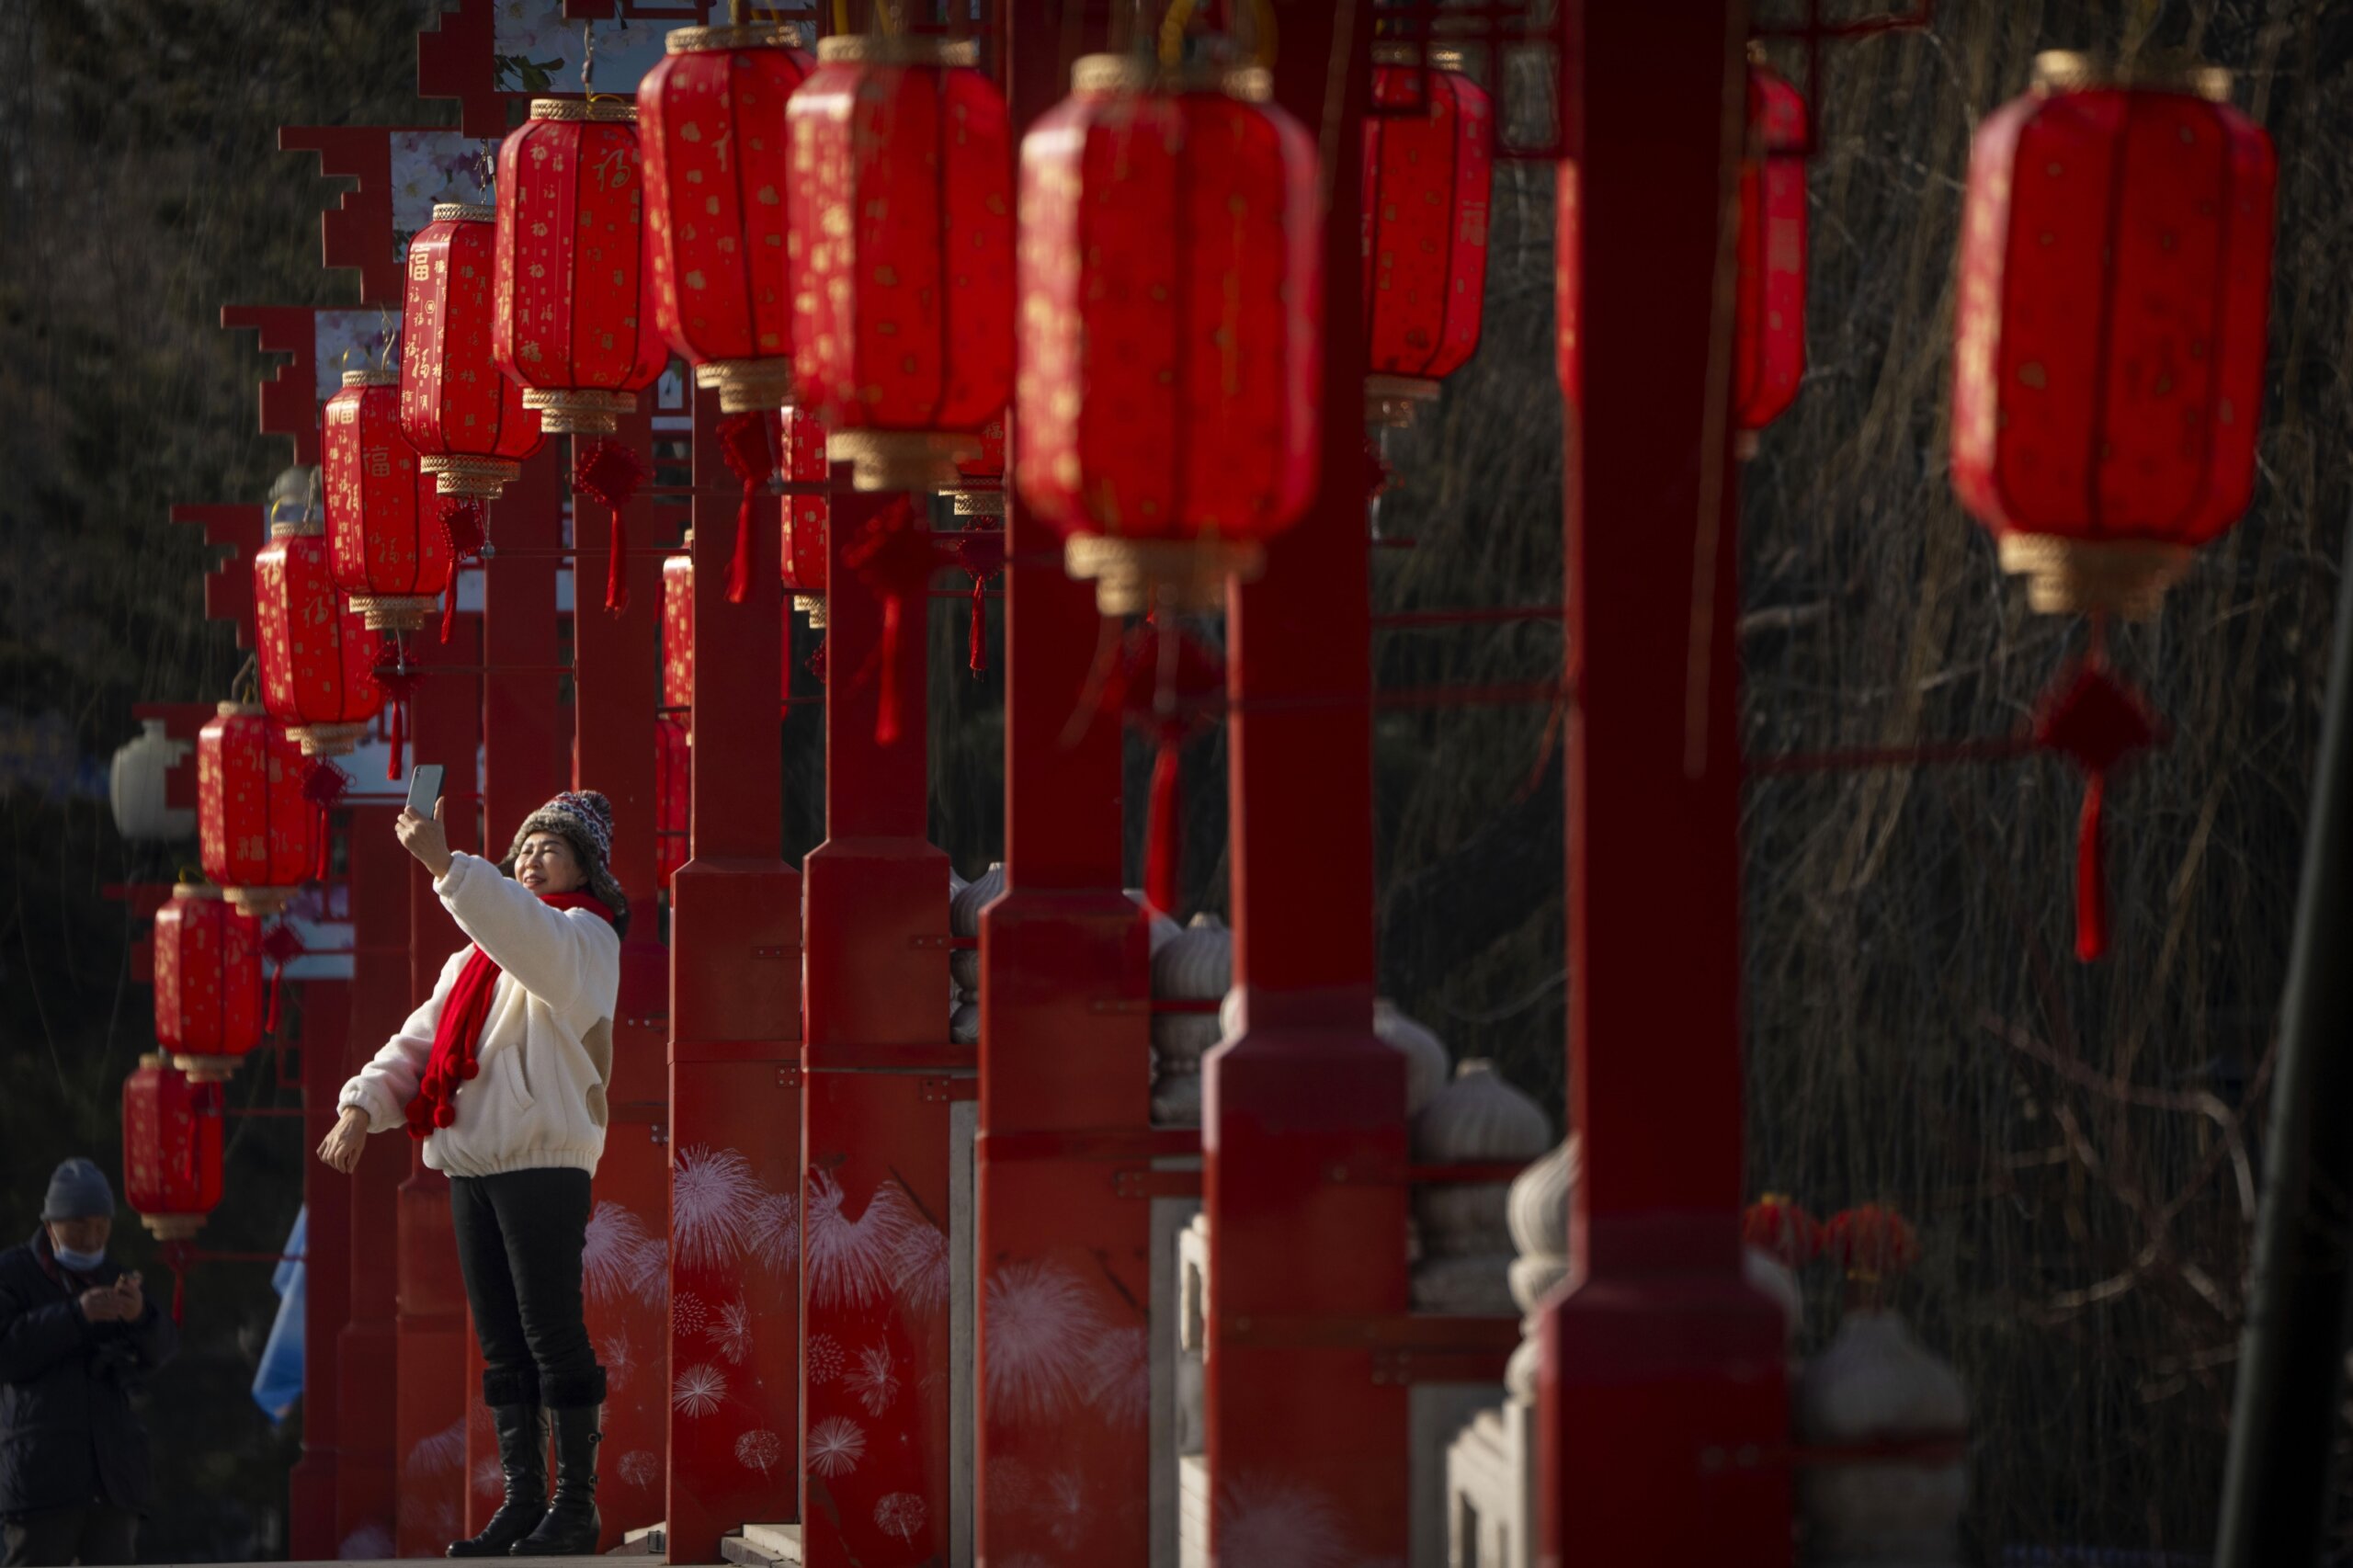 AP PHOTOS: East Asia marks Lunar New Year of the Rabbit